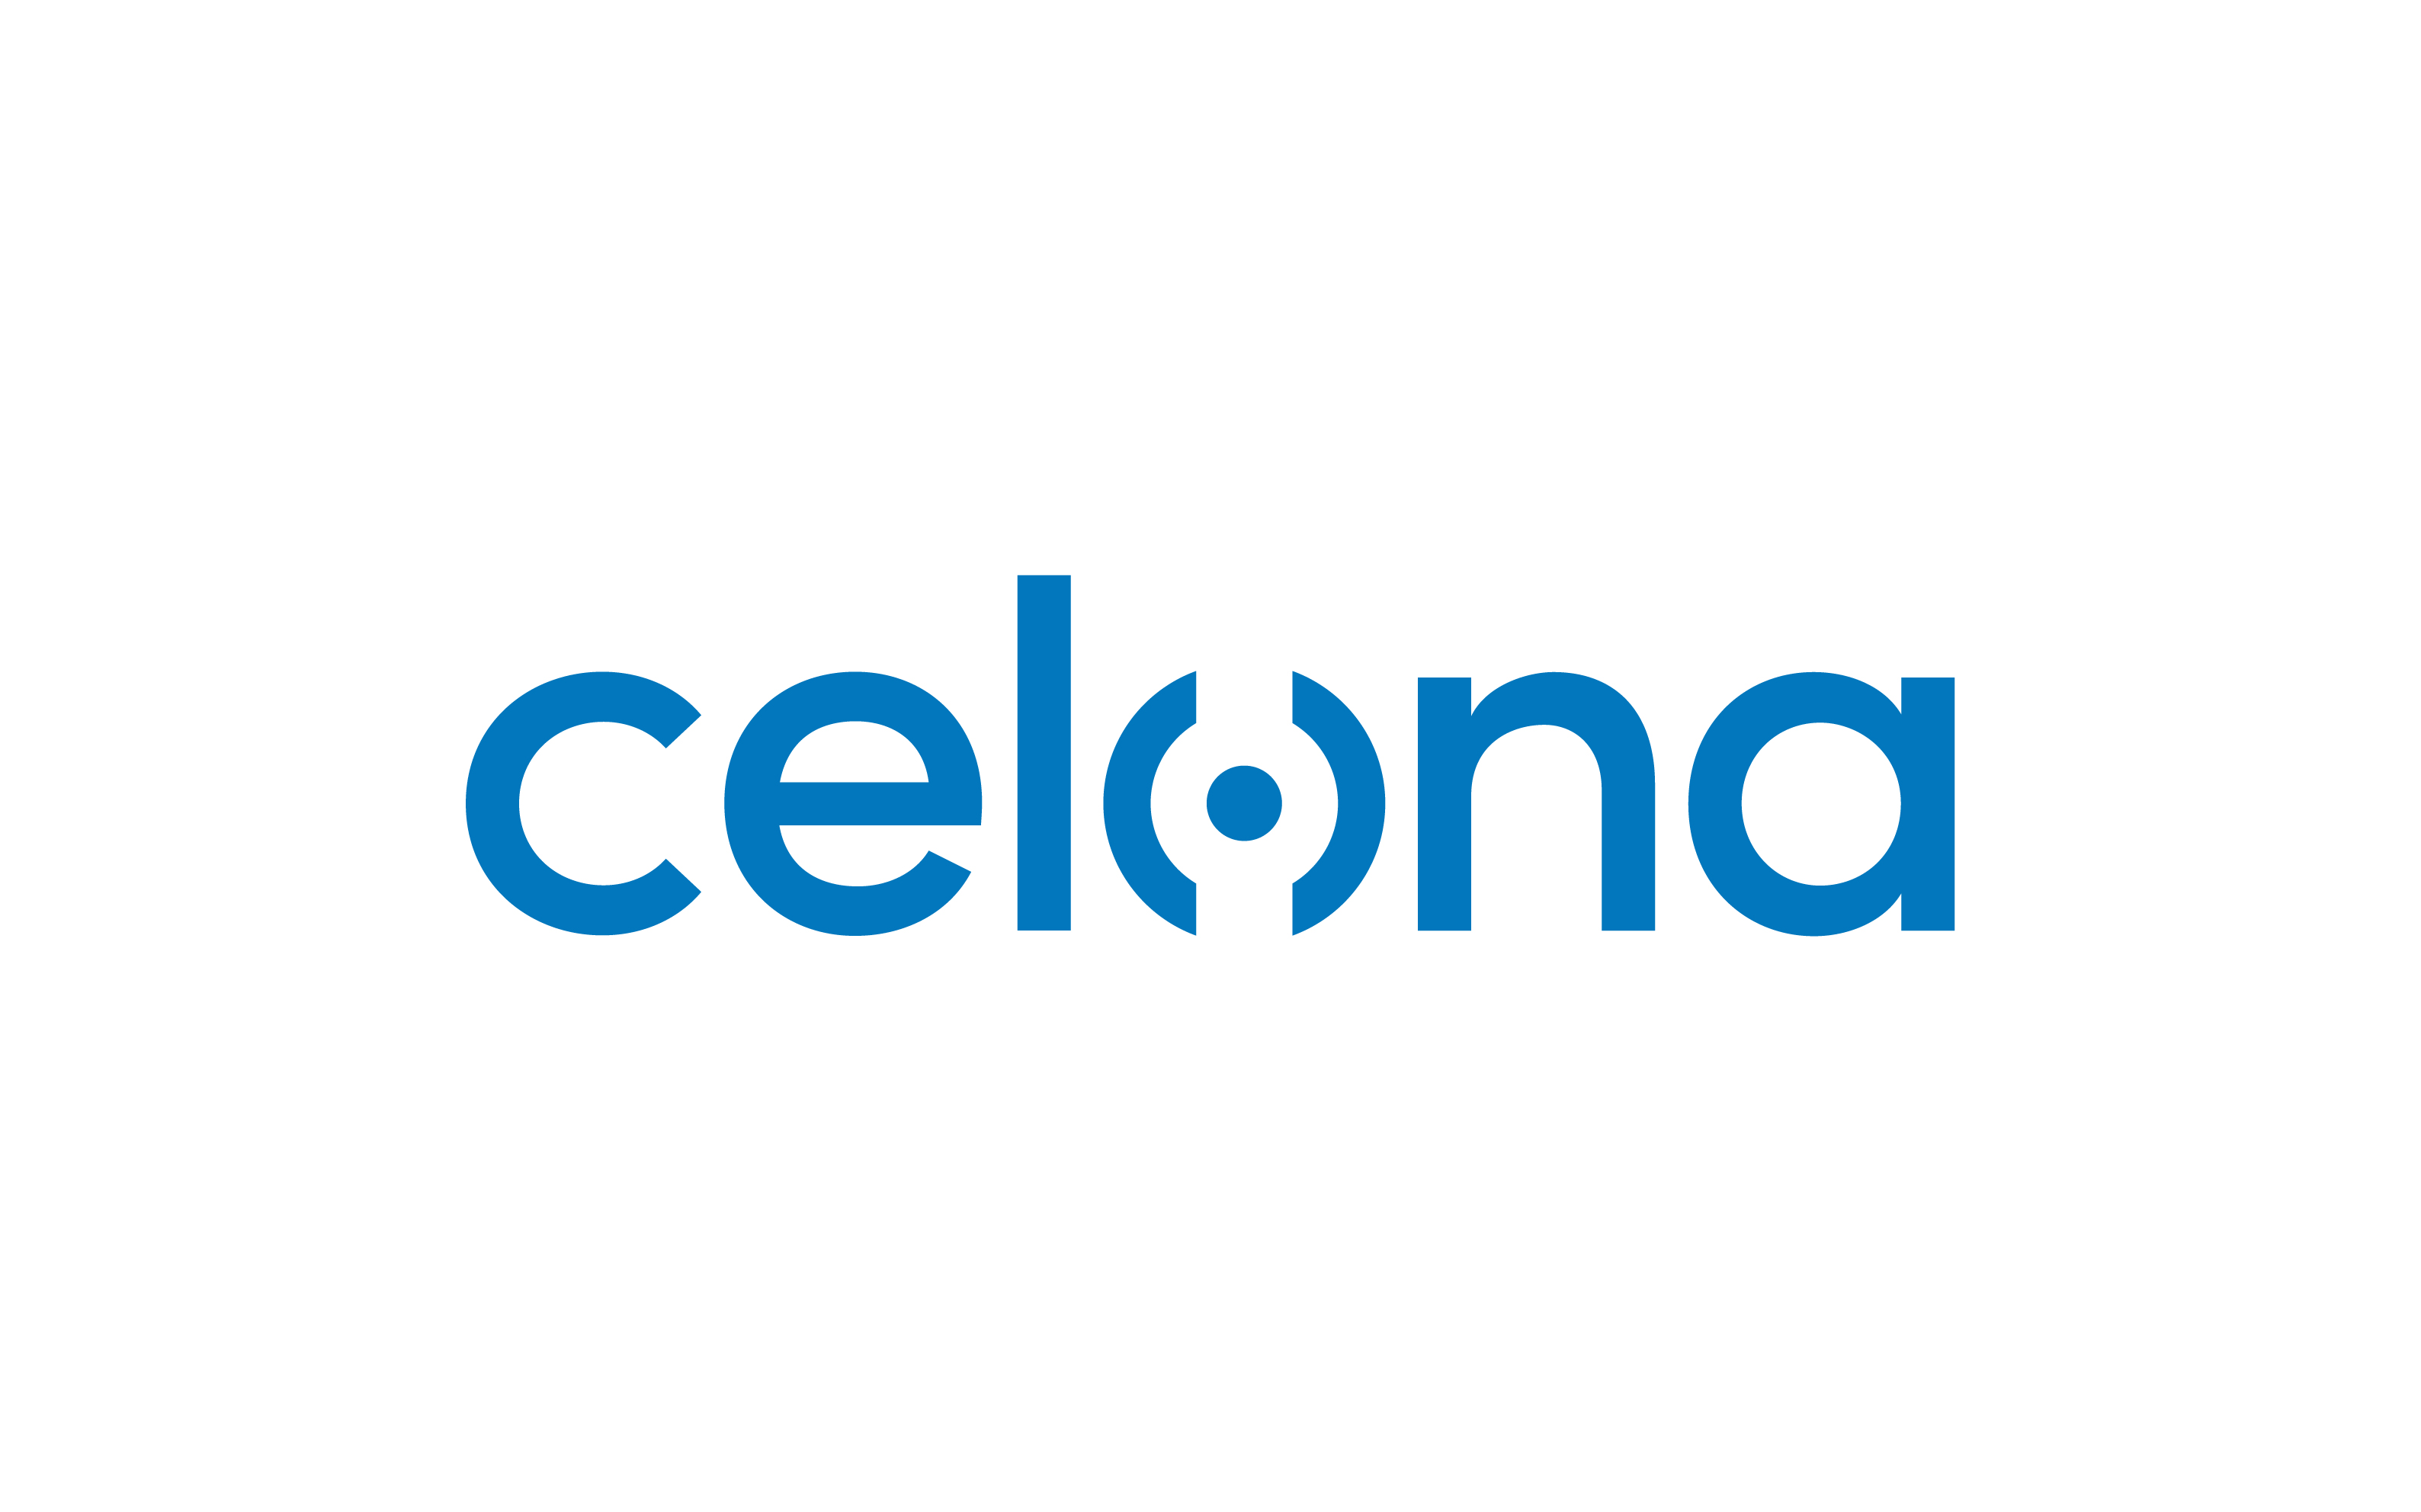 Celona brings private 5g to Southeast Asian markets